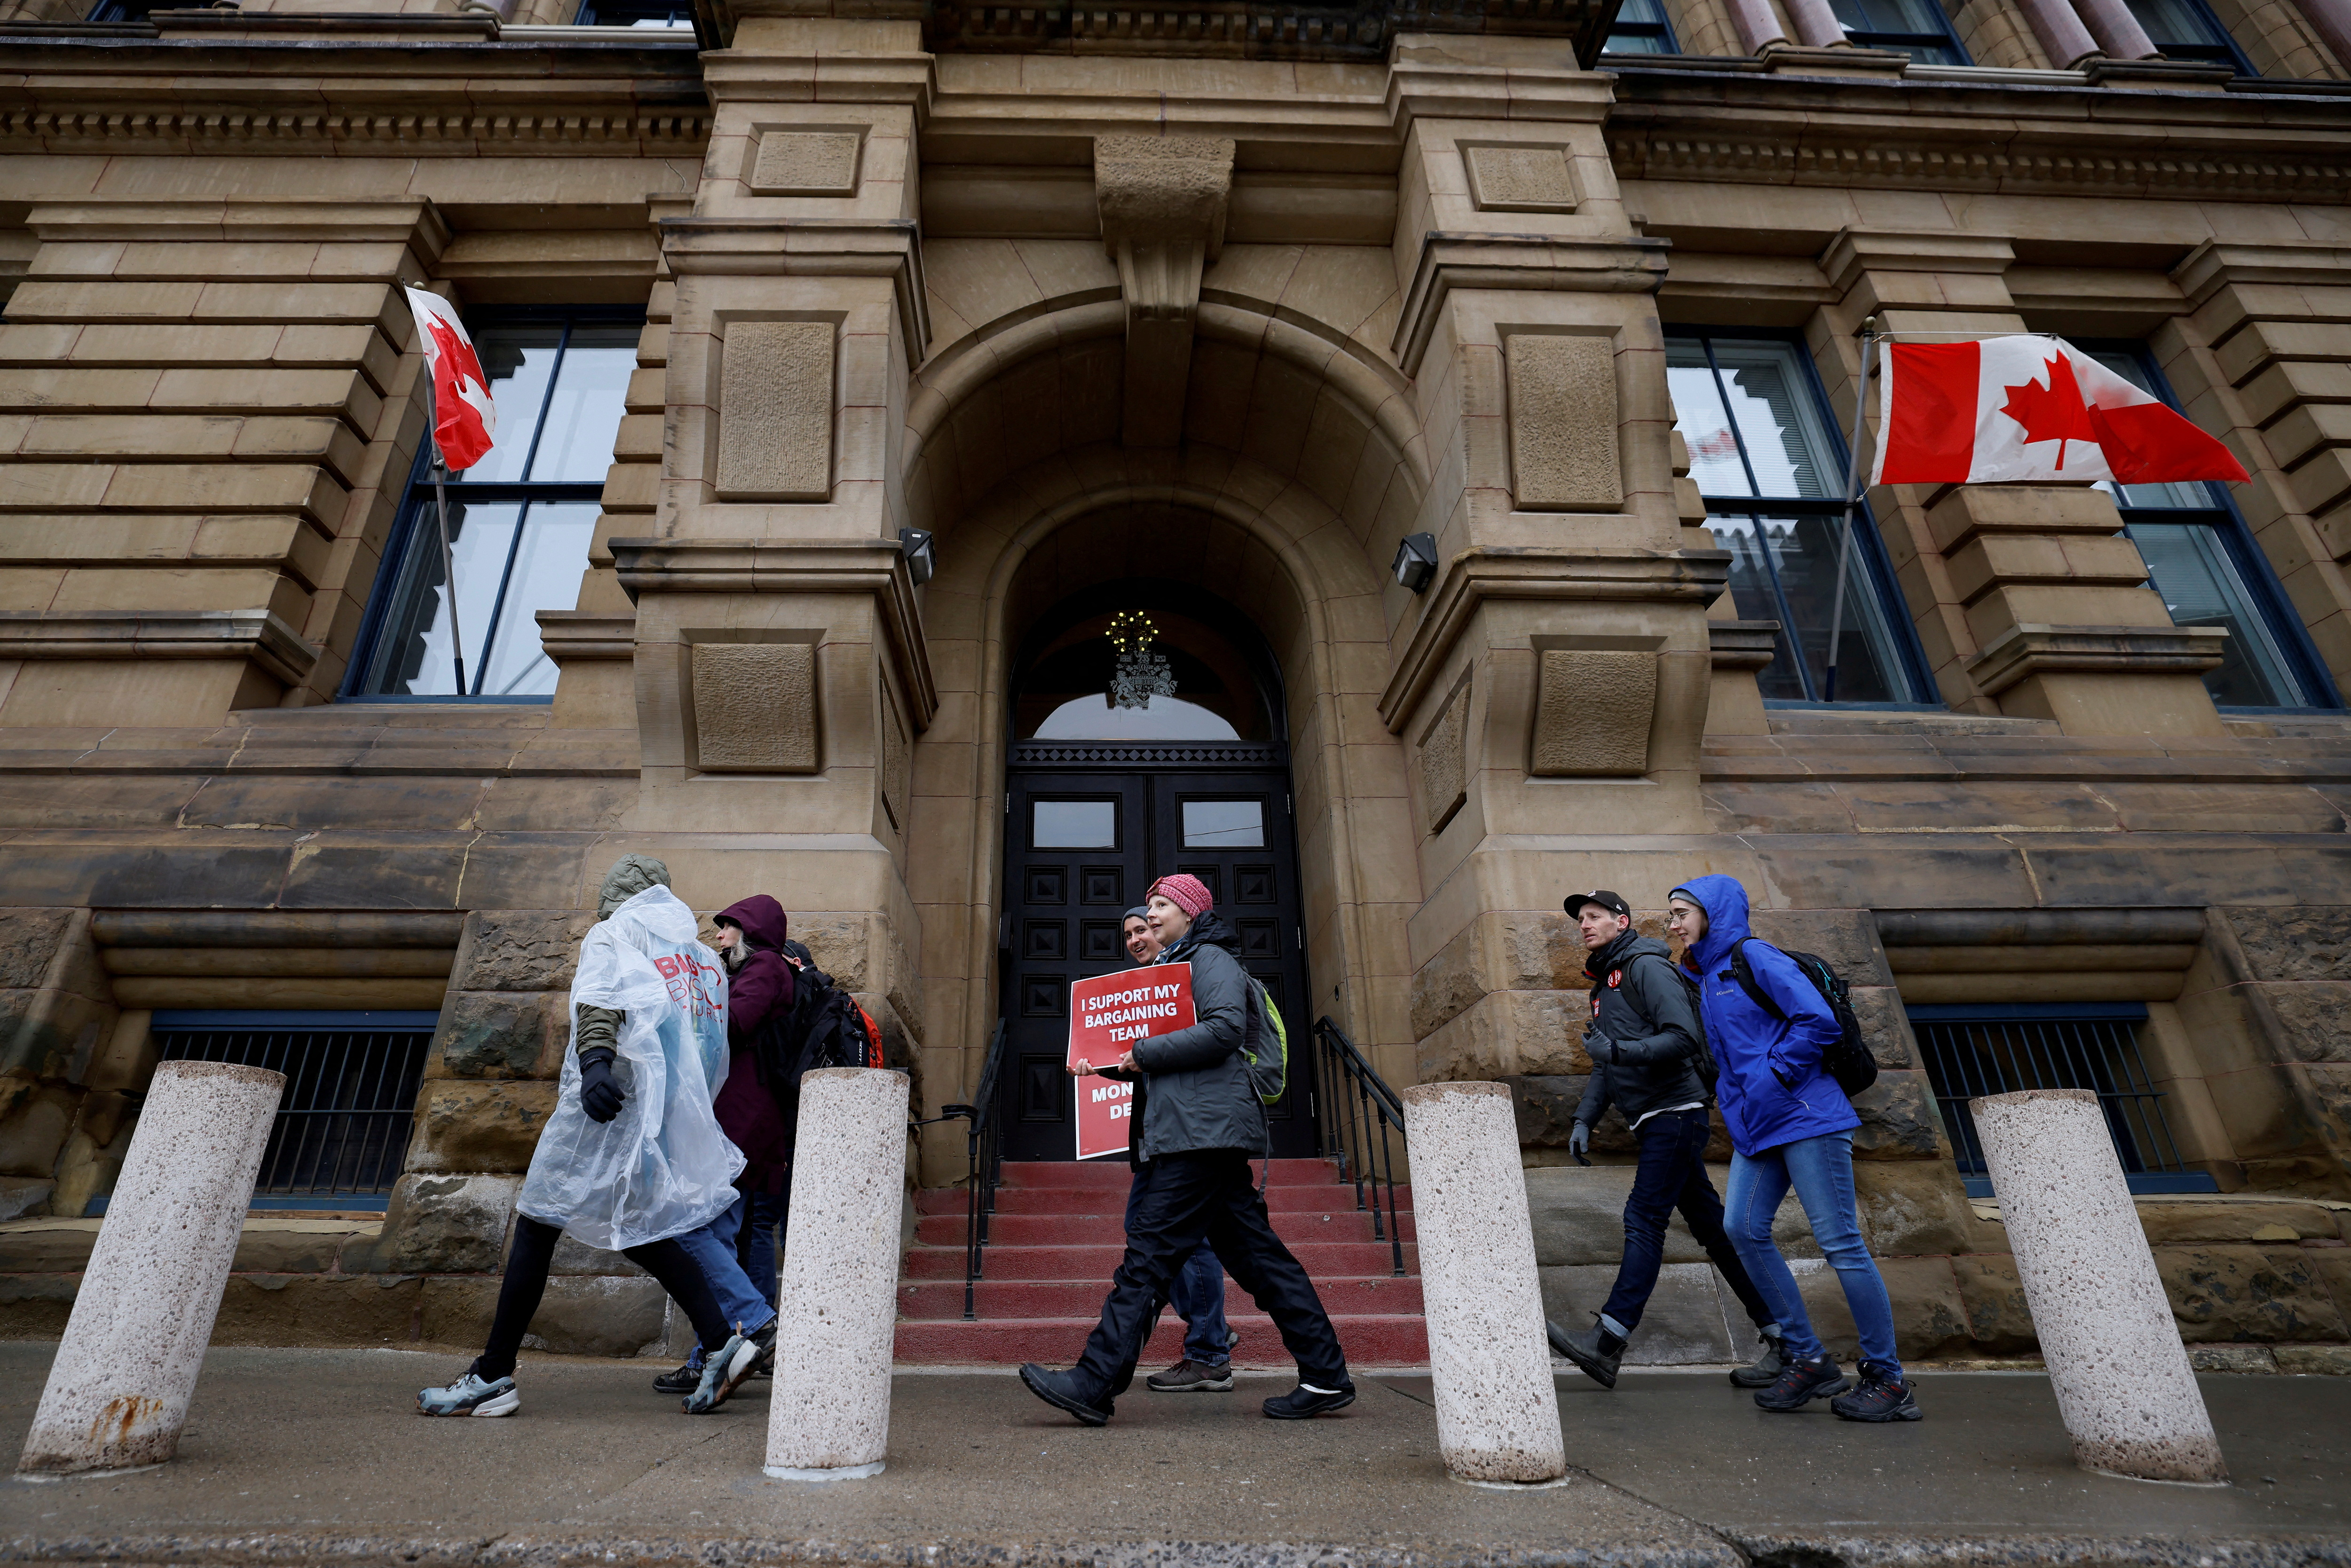 Approximately 155,000 public sector union workers continue to strike in Ottawa